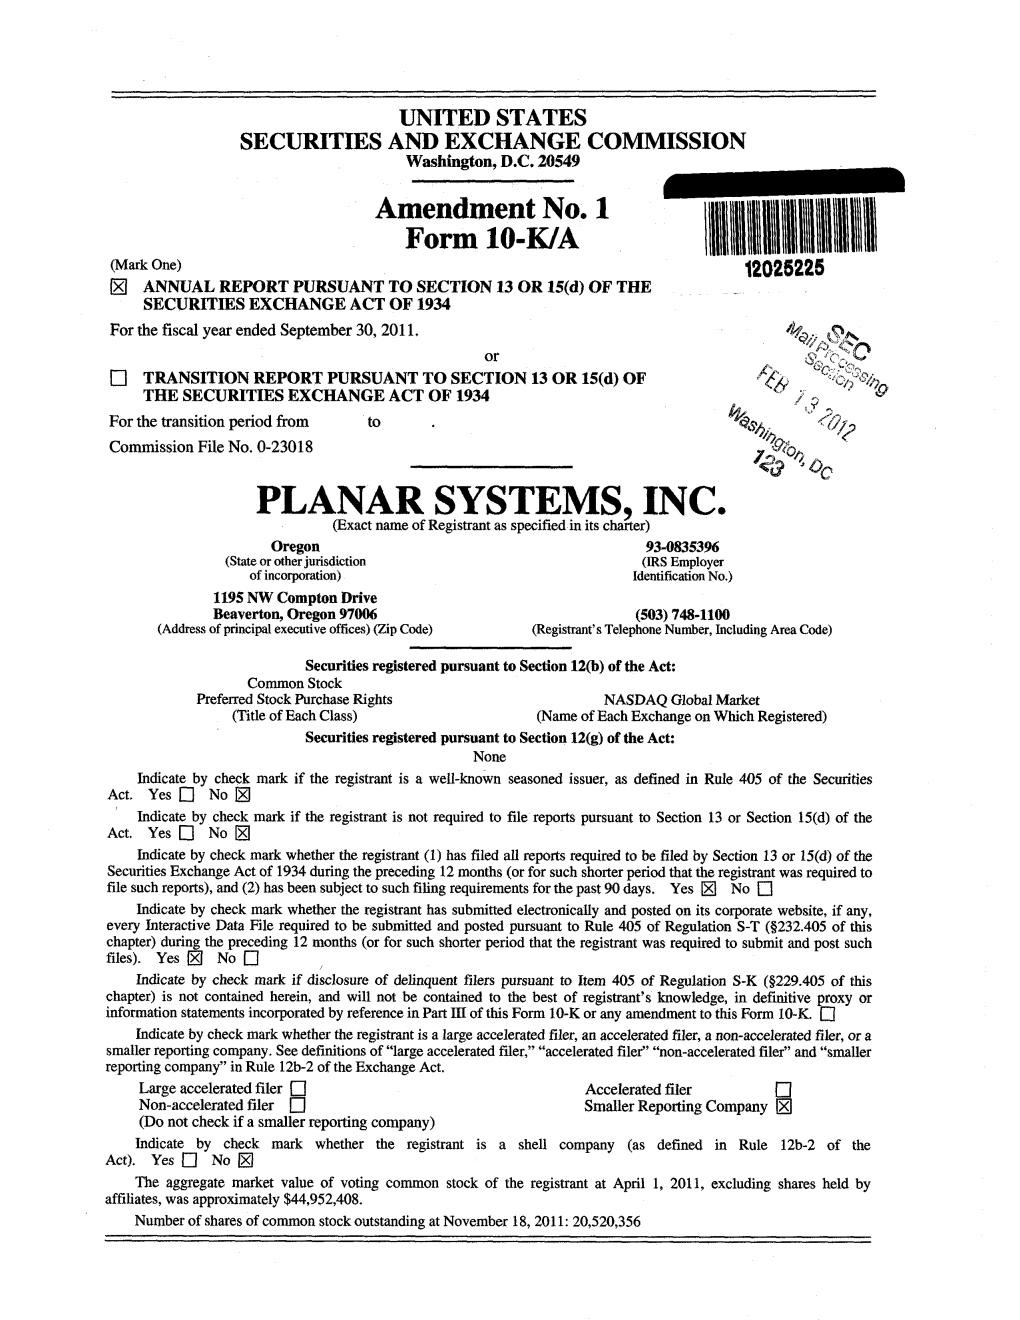 PLANAR SYSTEMS INC Exact Name of Registrant As Specified in Its Charter